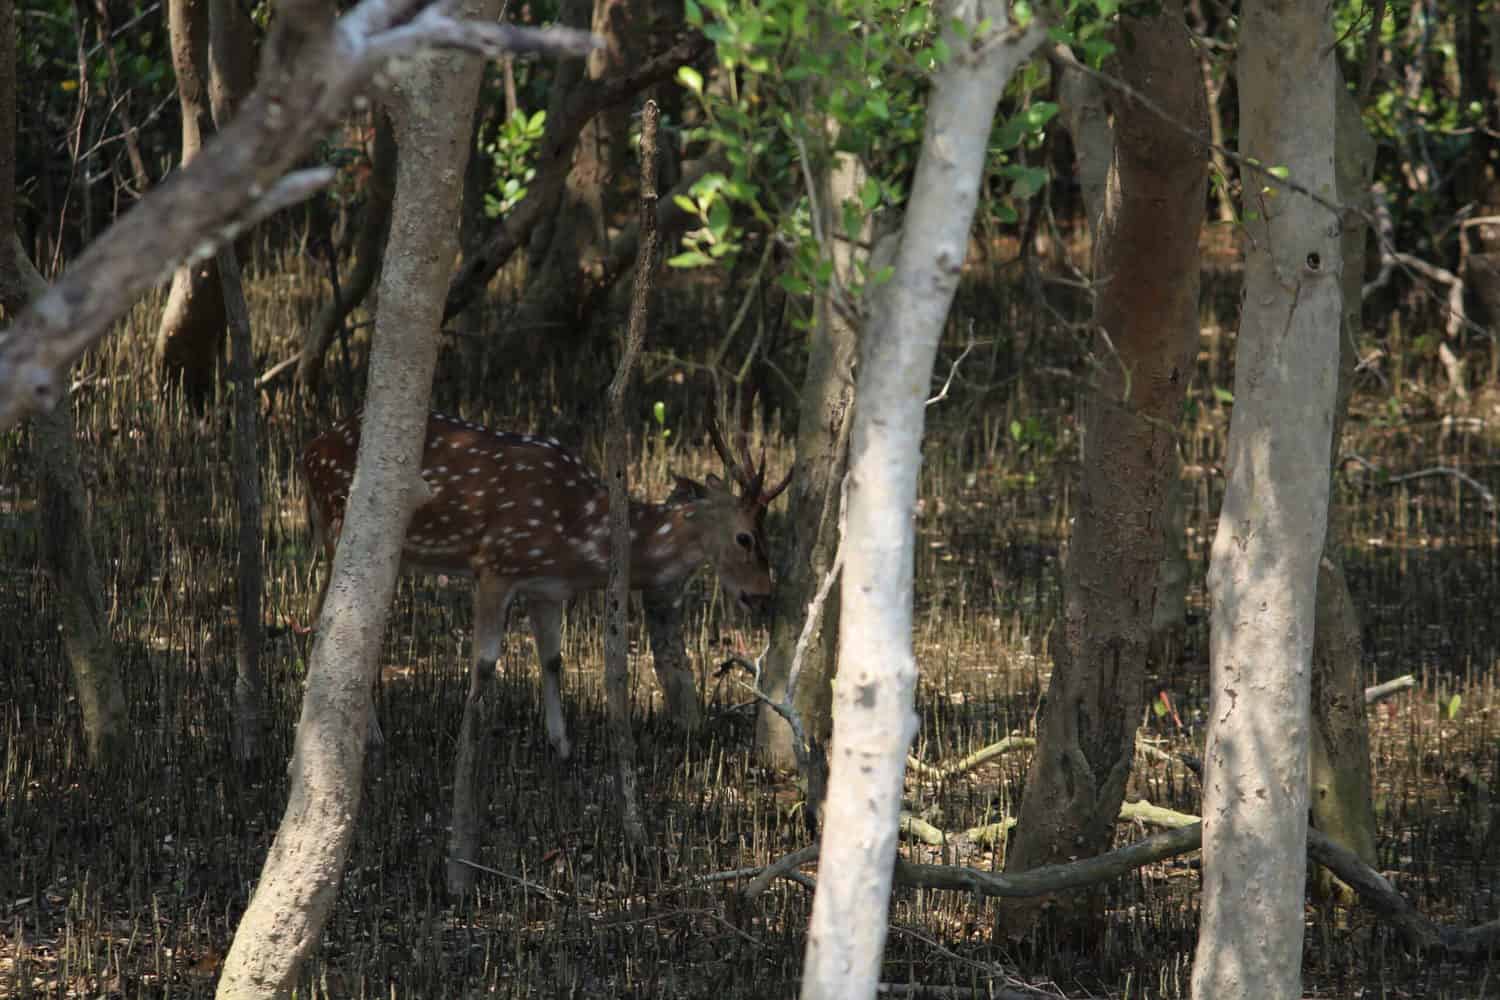 Deer sighted from boat, Sundarbans, West Bengal